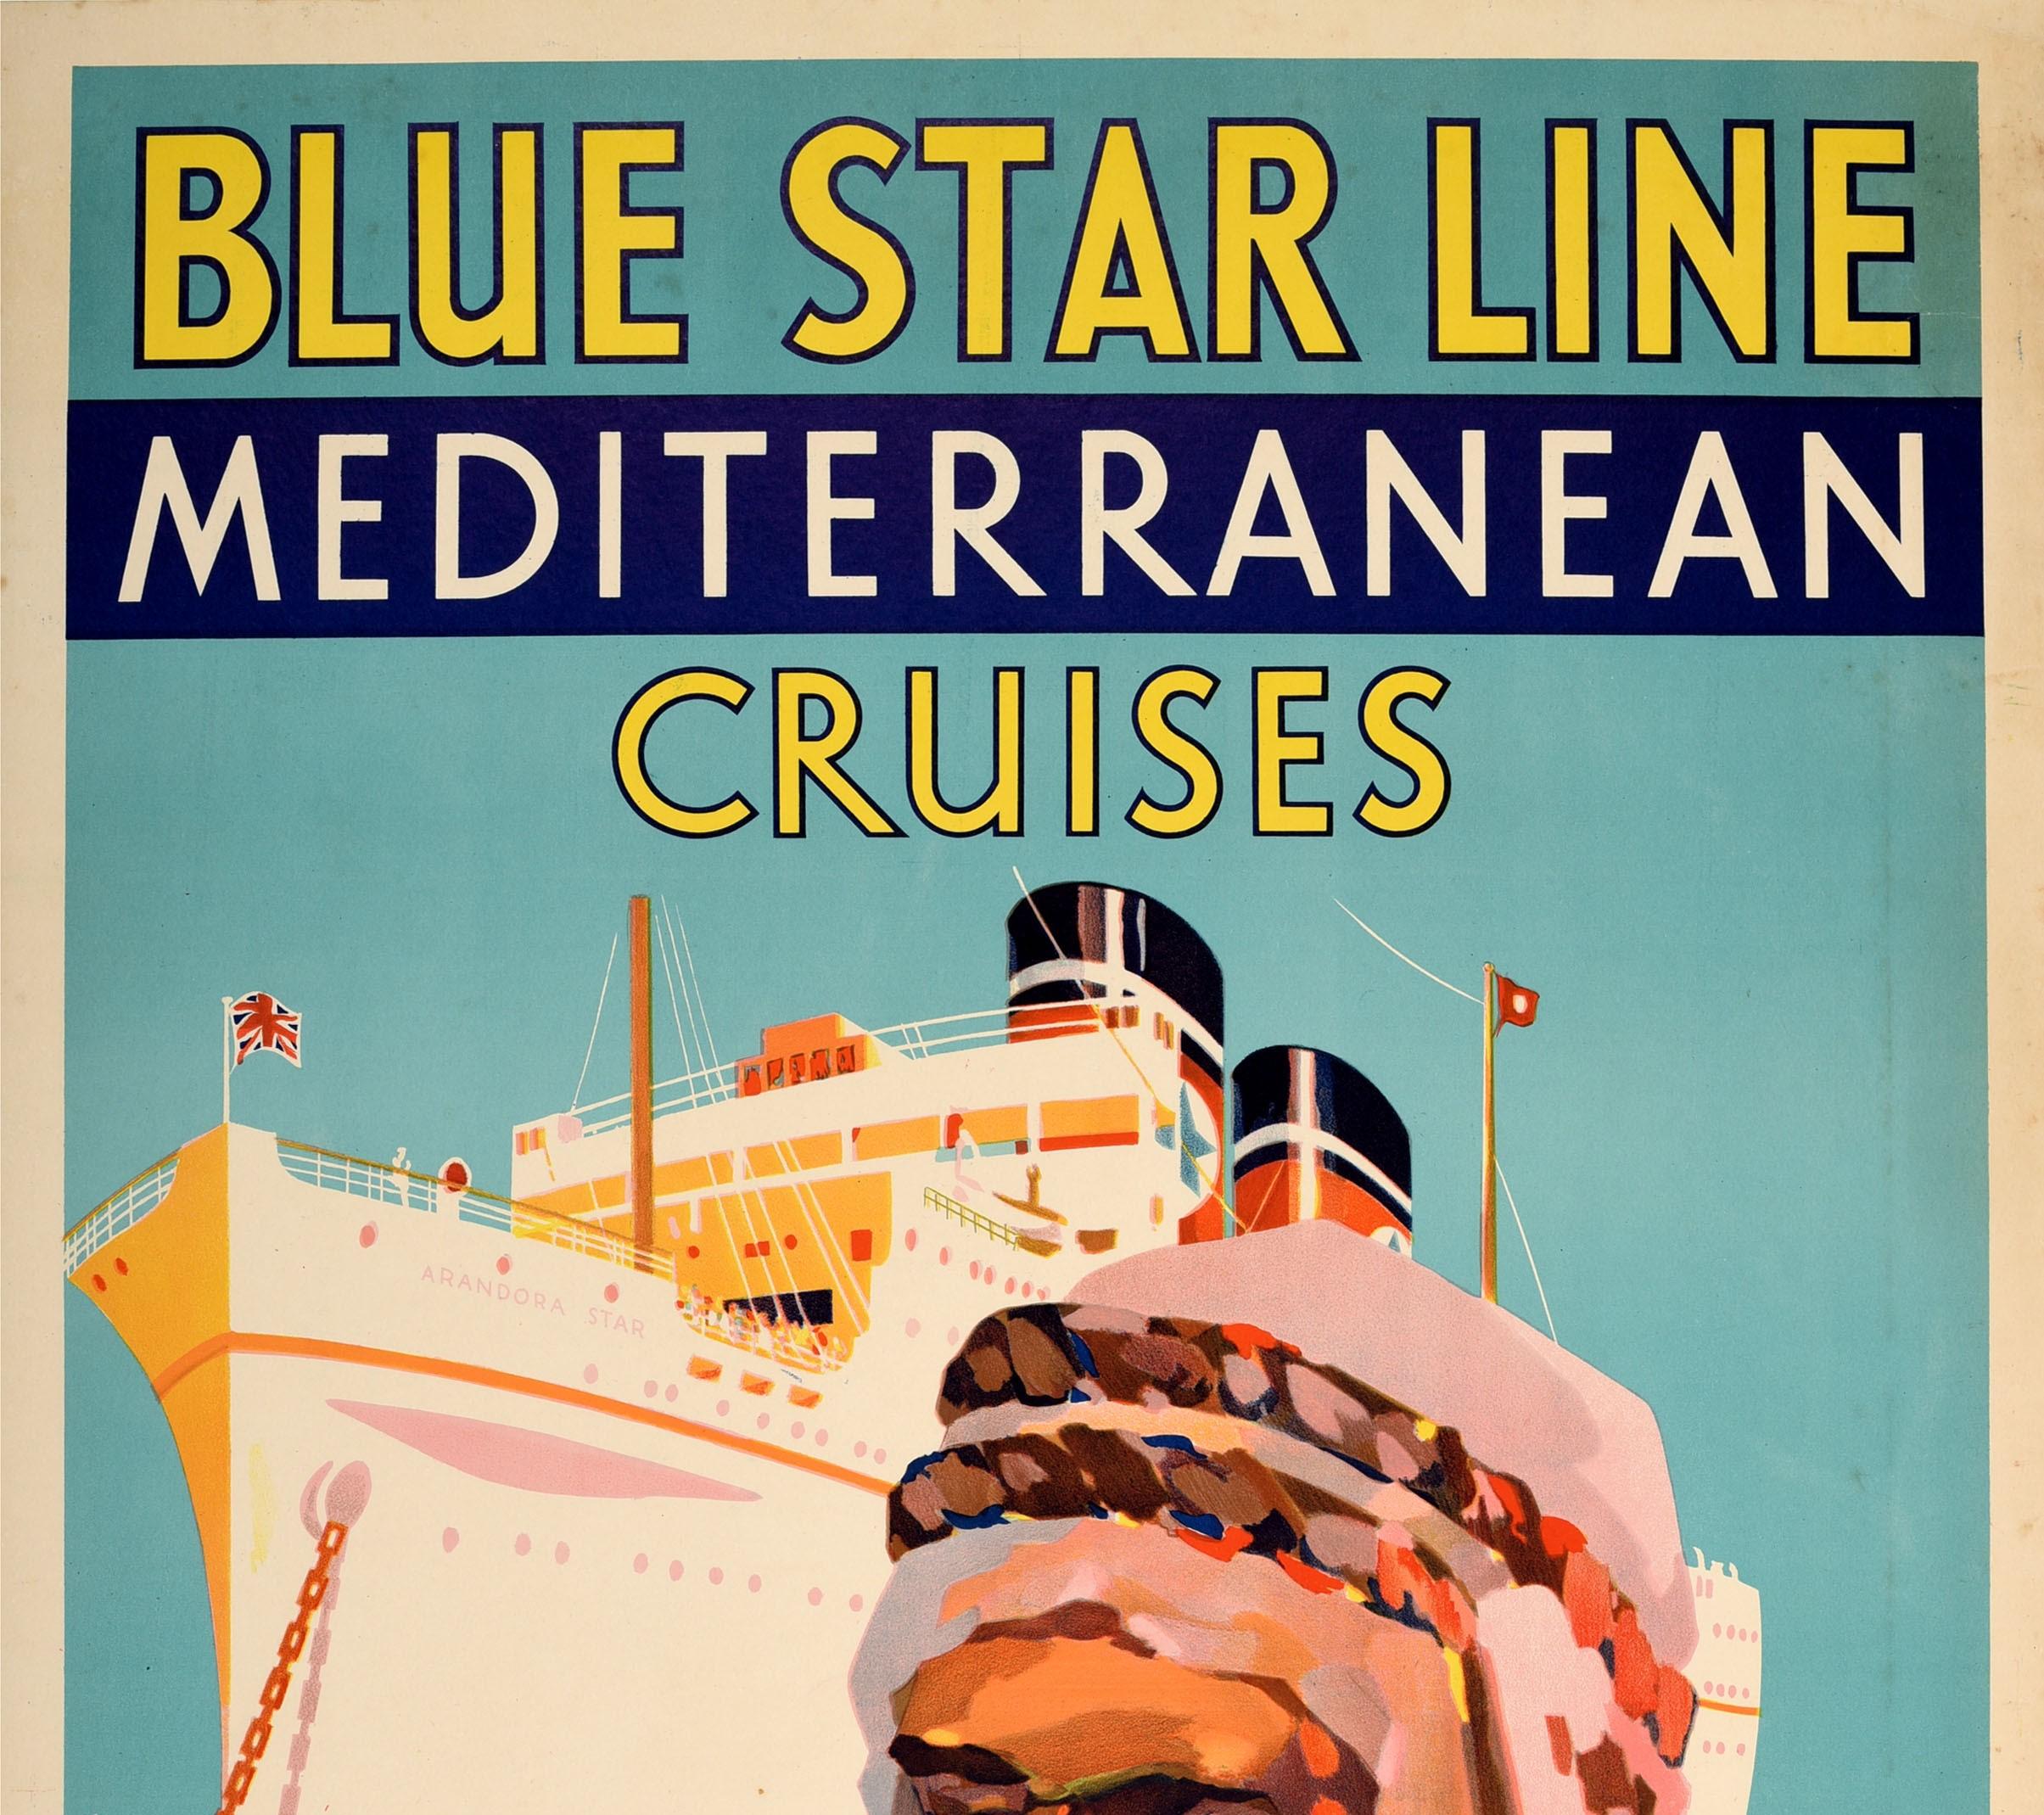 Original vintage cruise travel poster for Blue Star Line Mediterranean Cruises on the Queen of Cruising Liners Arandora Star featuring a colourful image of a man in front of a steam ship reflected on the blue sea below with buildings visible on land